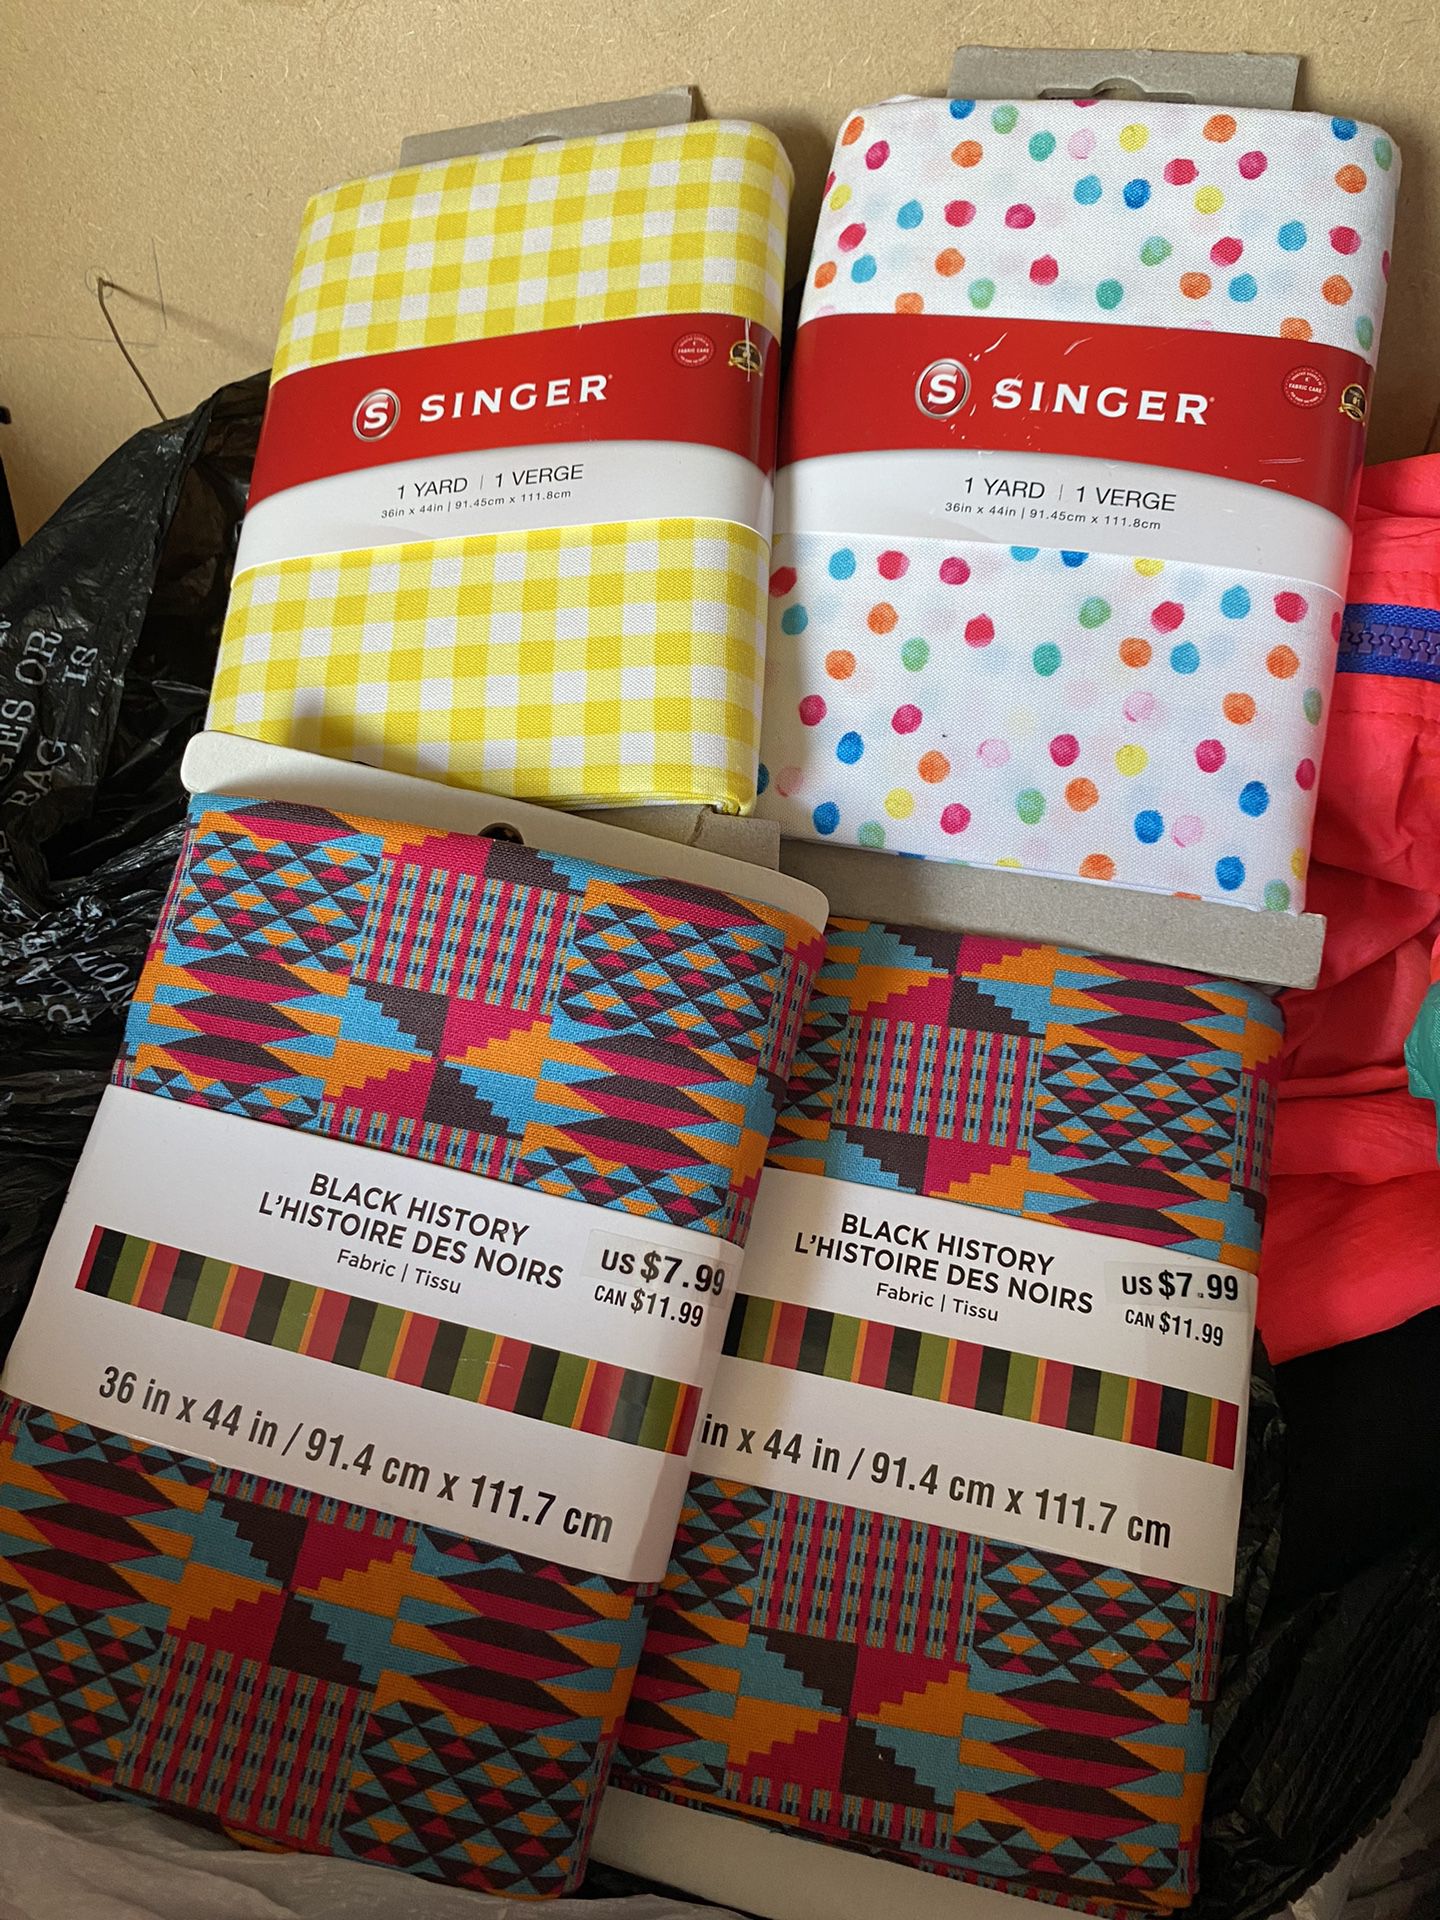 Singer Fabric for Sewing crafts